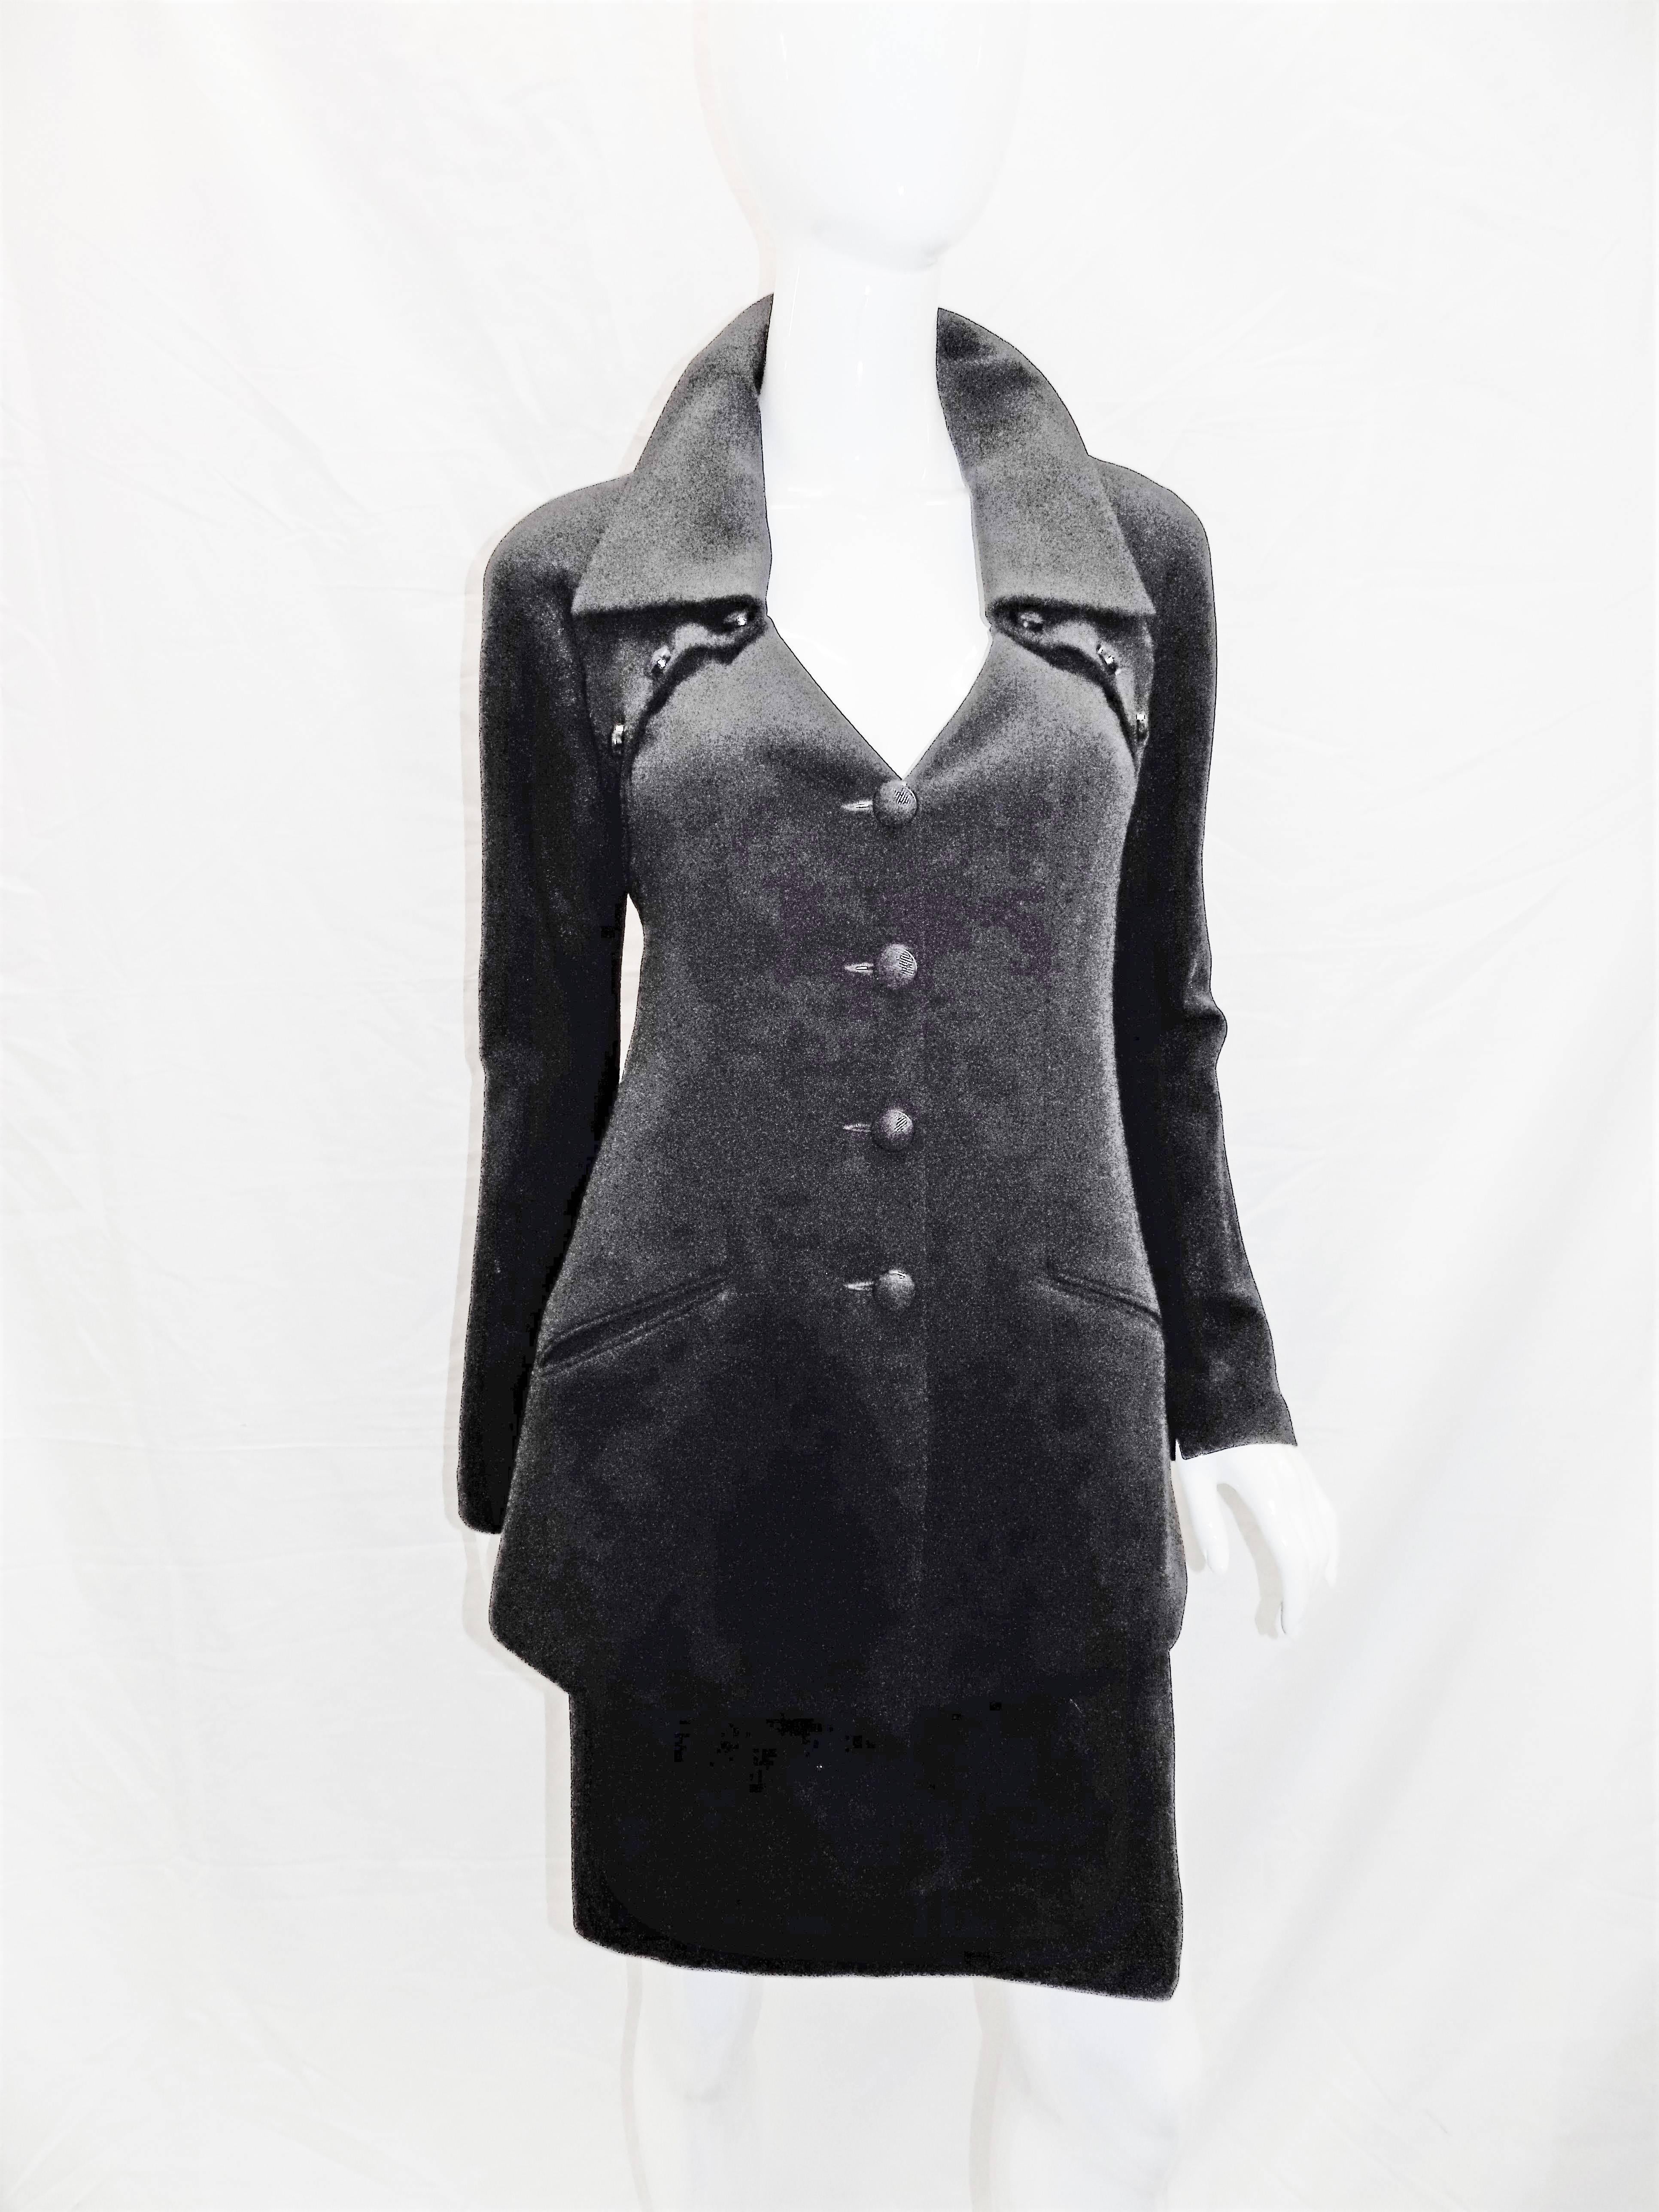  Chloe by Karl Lagerfeld Vintage black skirt suit  In Excellent Condition For Sale In New York, NY